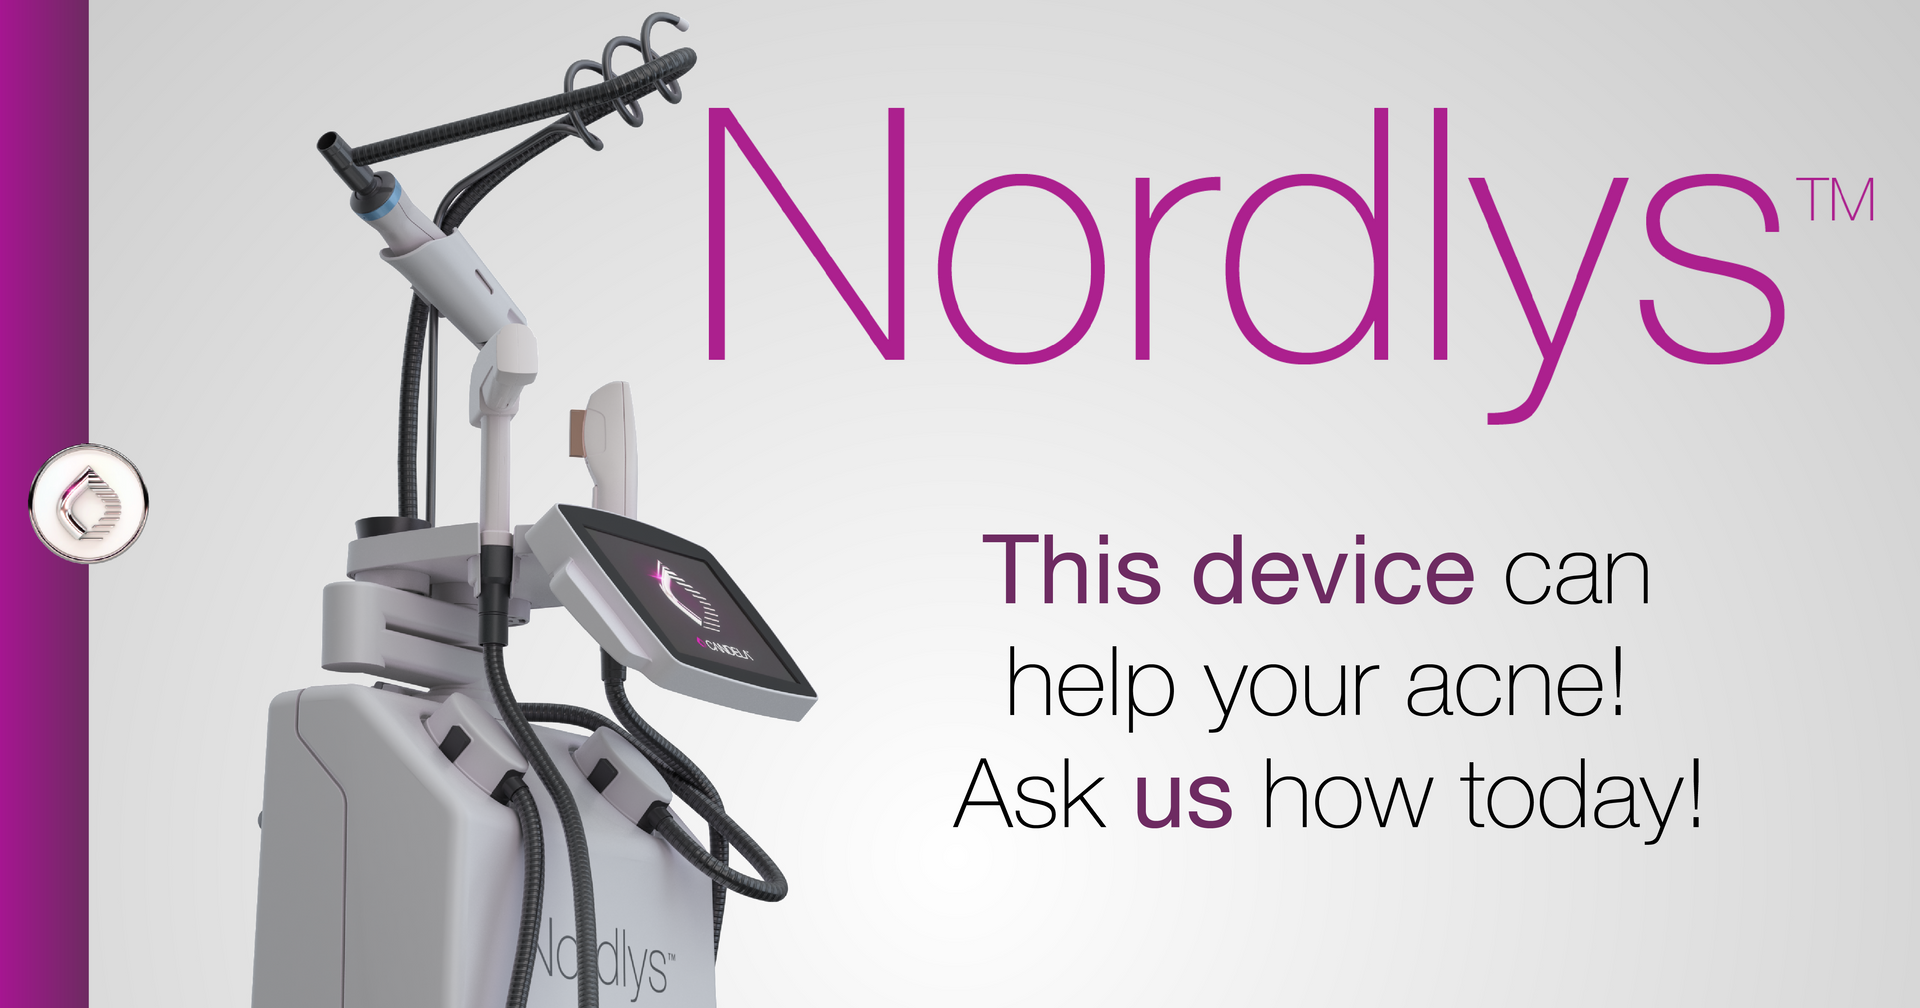 an advertisement for nordlys says that this device can help your acne